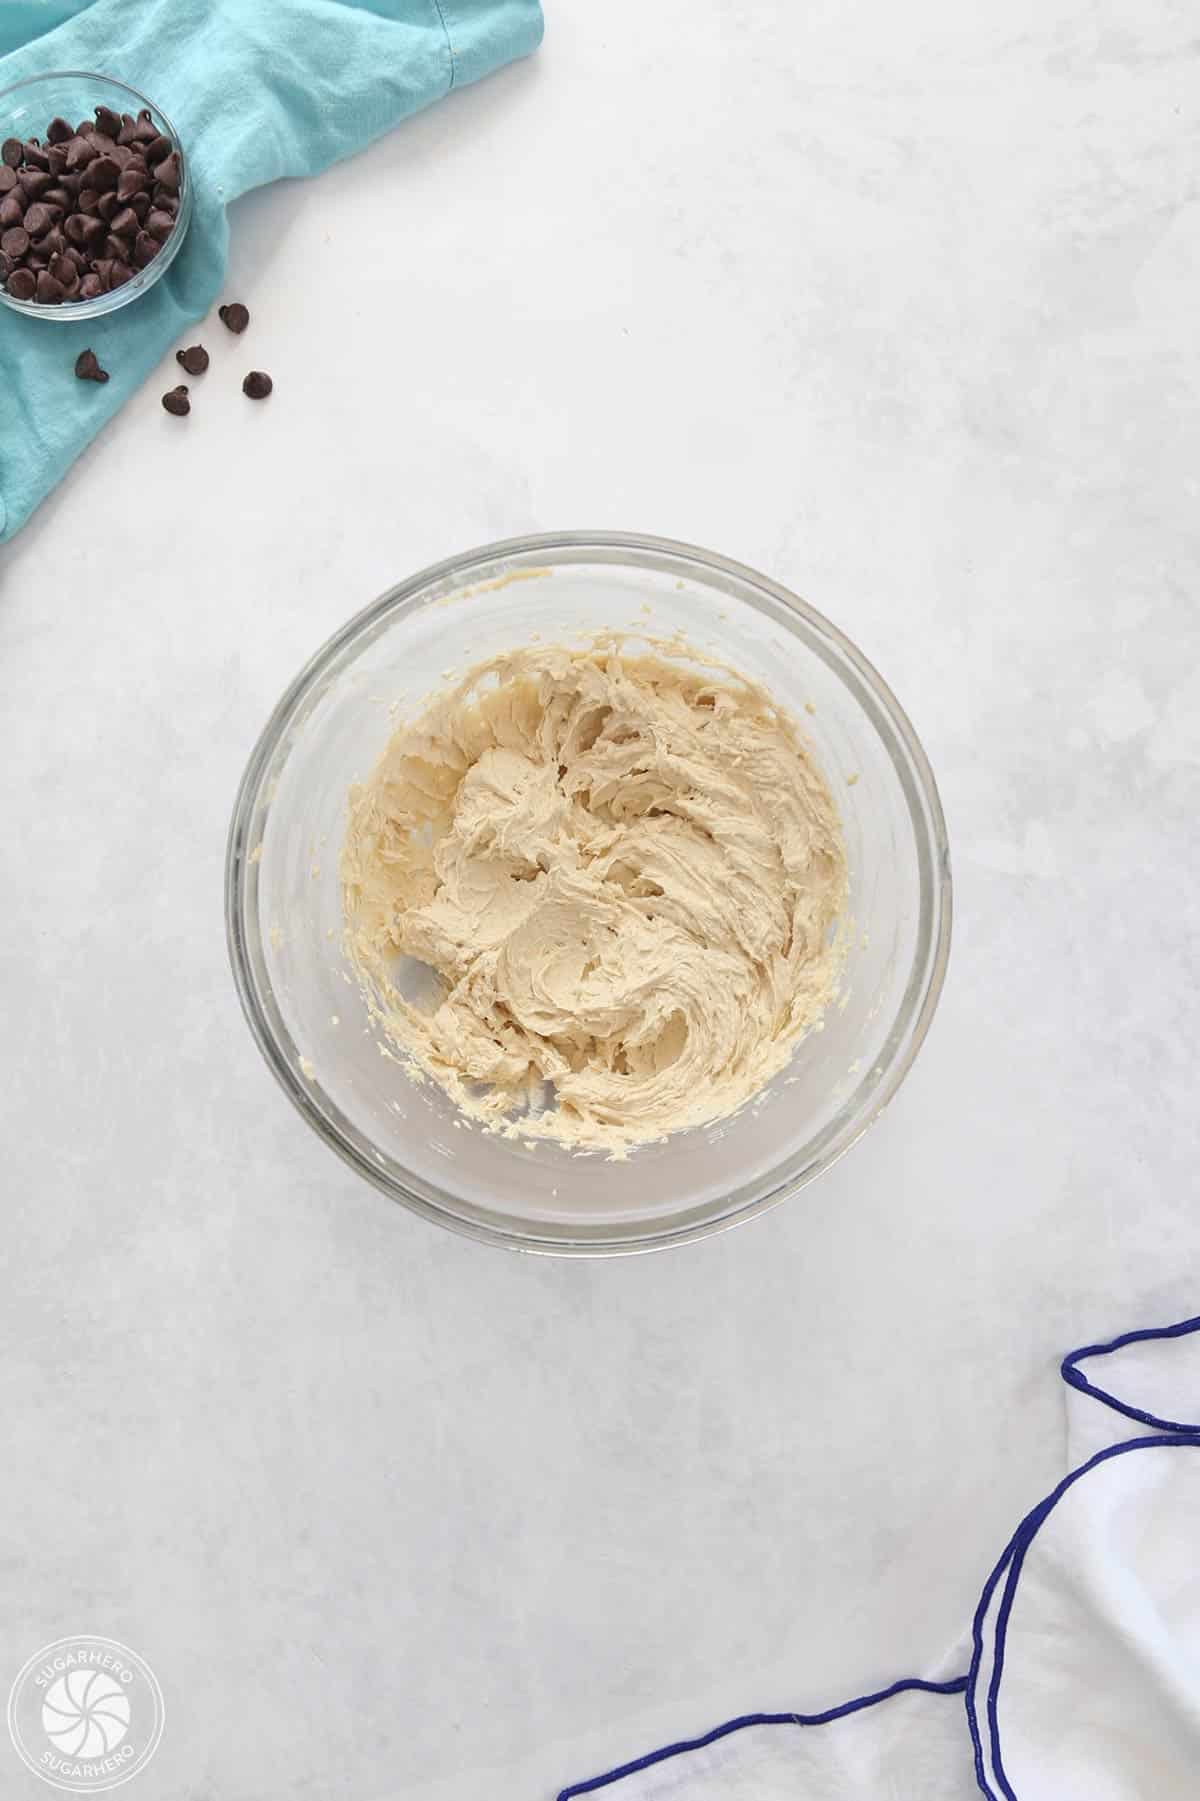 Cookie dough frosting in a clear glass bowl.